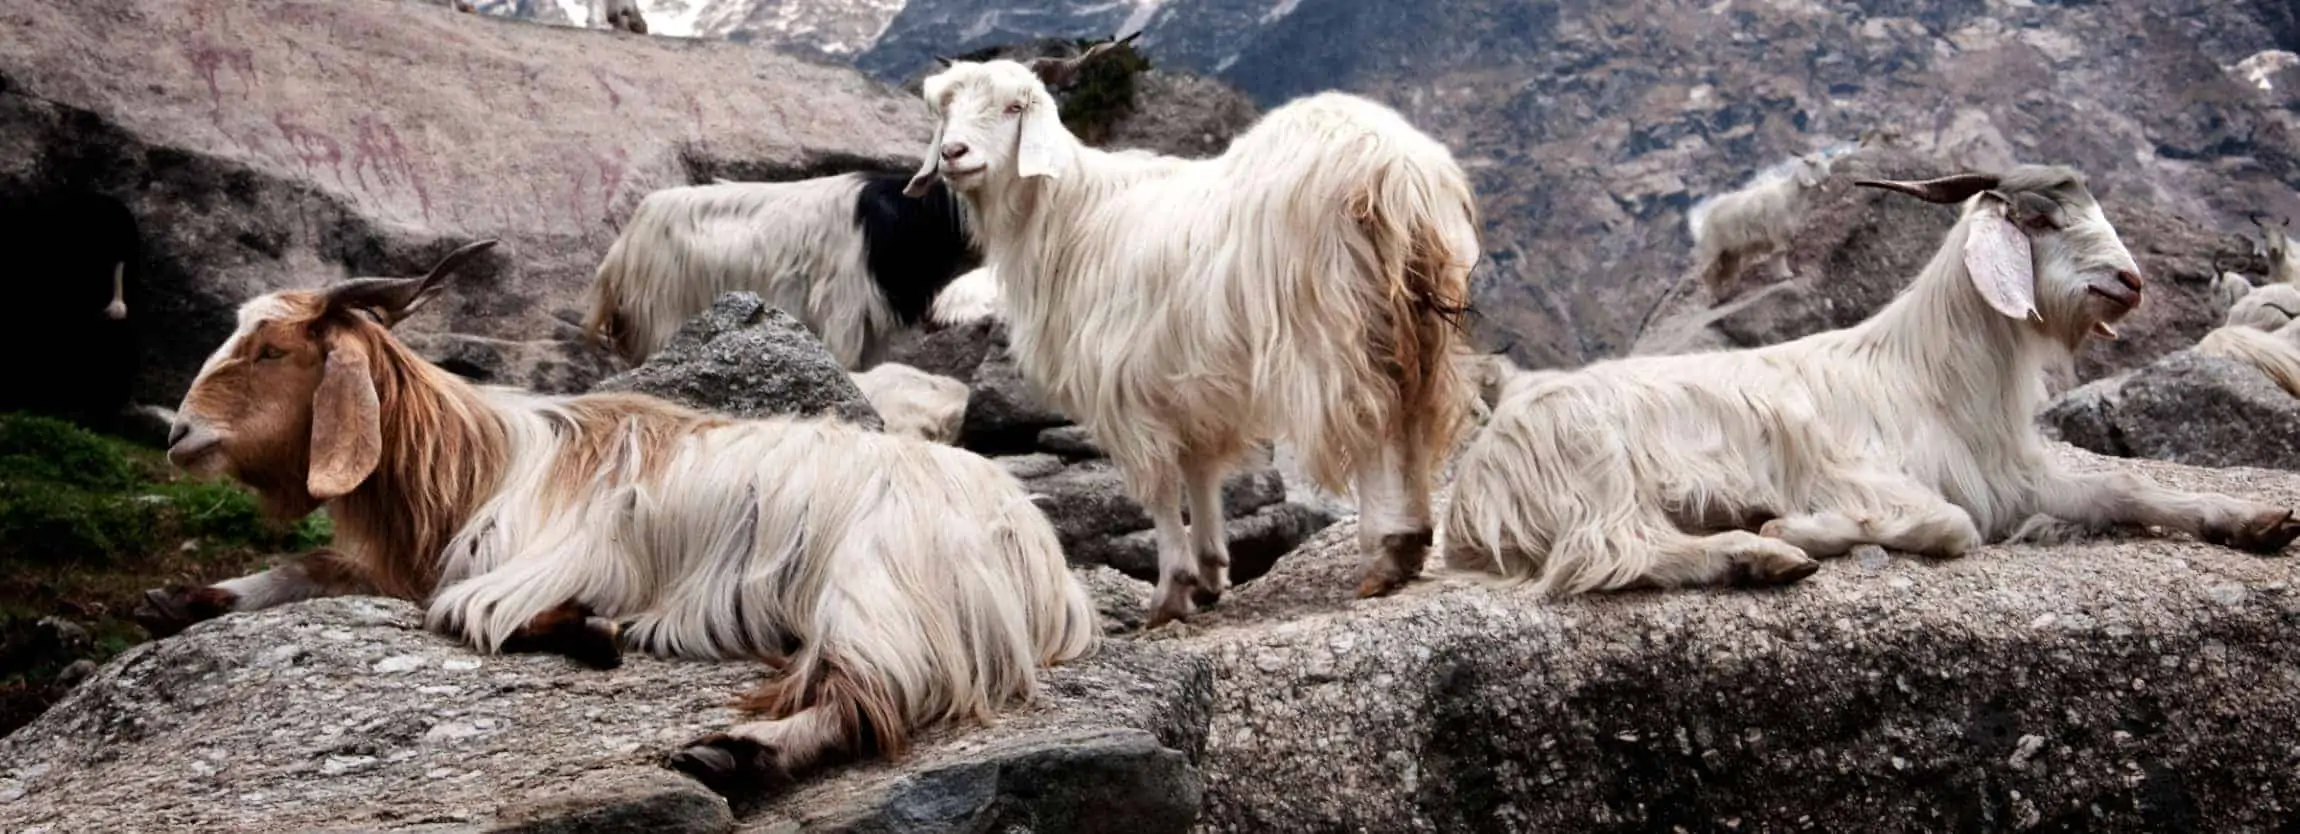 mongolian cashmere goat wool products online